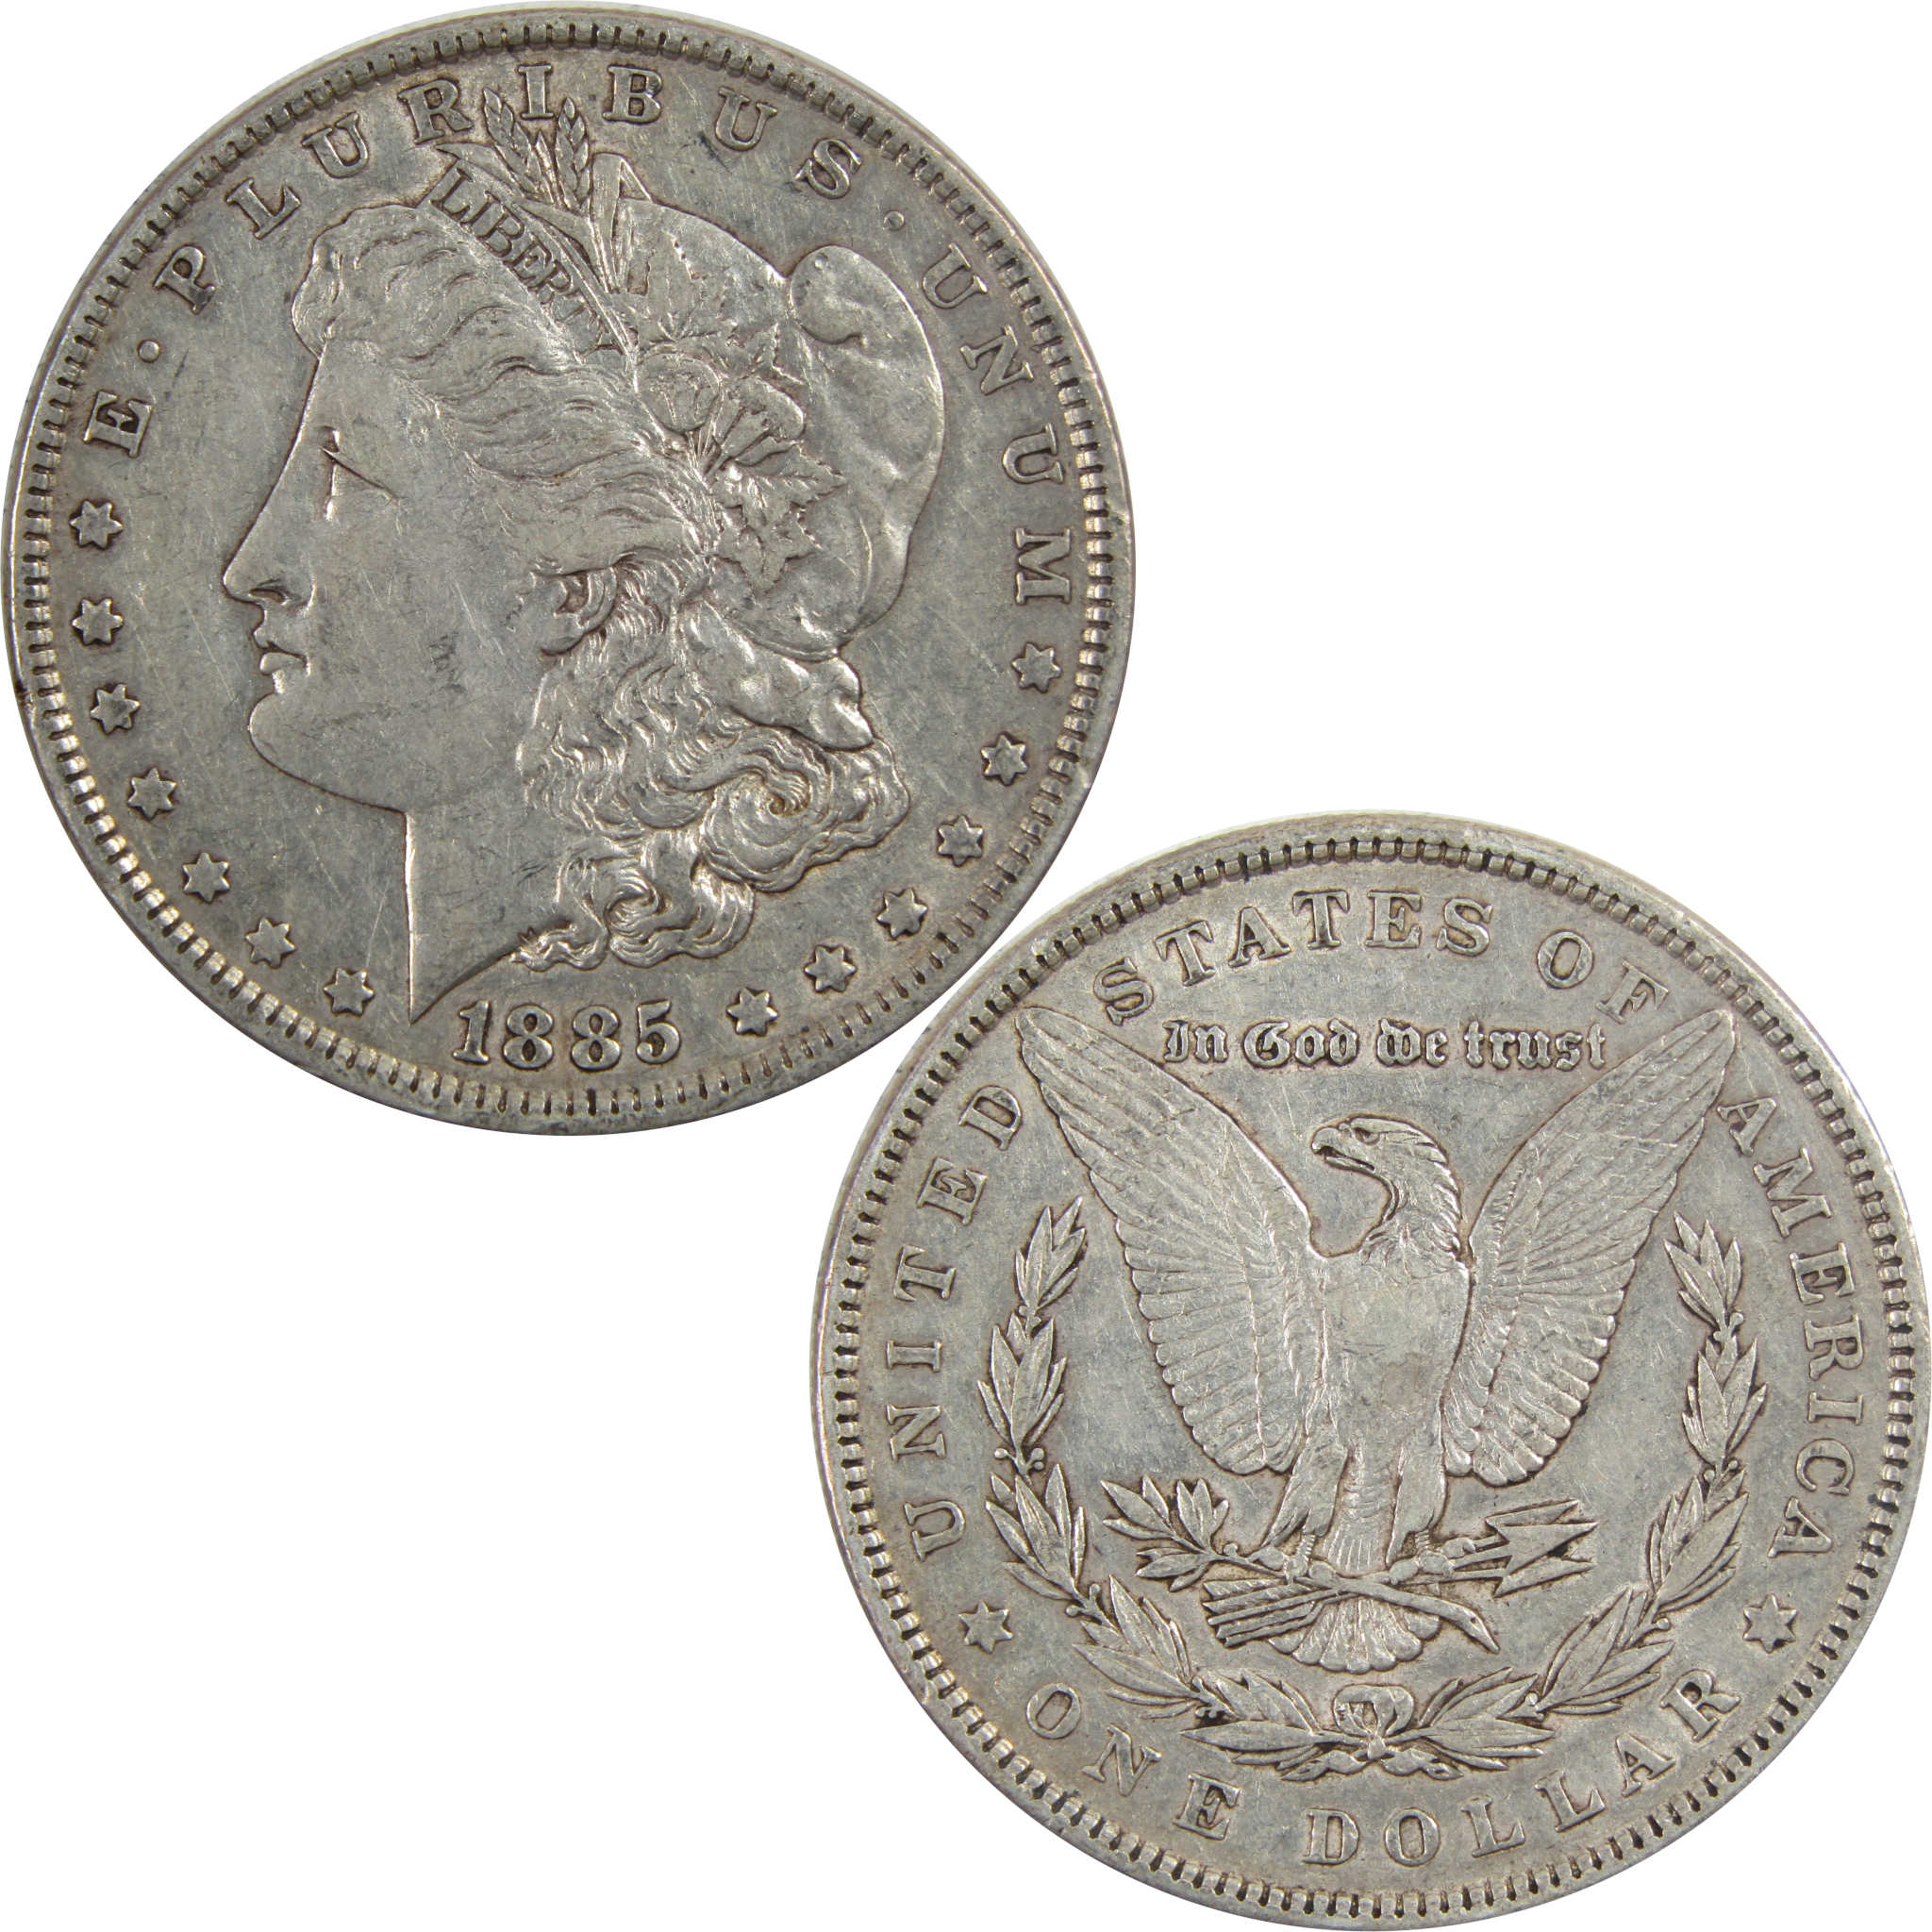 1885 Morgan Dollar XF EF Extremely Fine 90% Silver $1 Coin SKU:I5558 - Morgan coin - Morgan silver dollar - Morgan silver dollar for sale - Profile Coins &amp; Collectibles